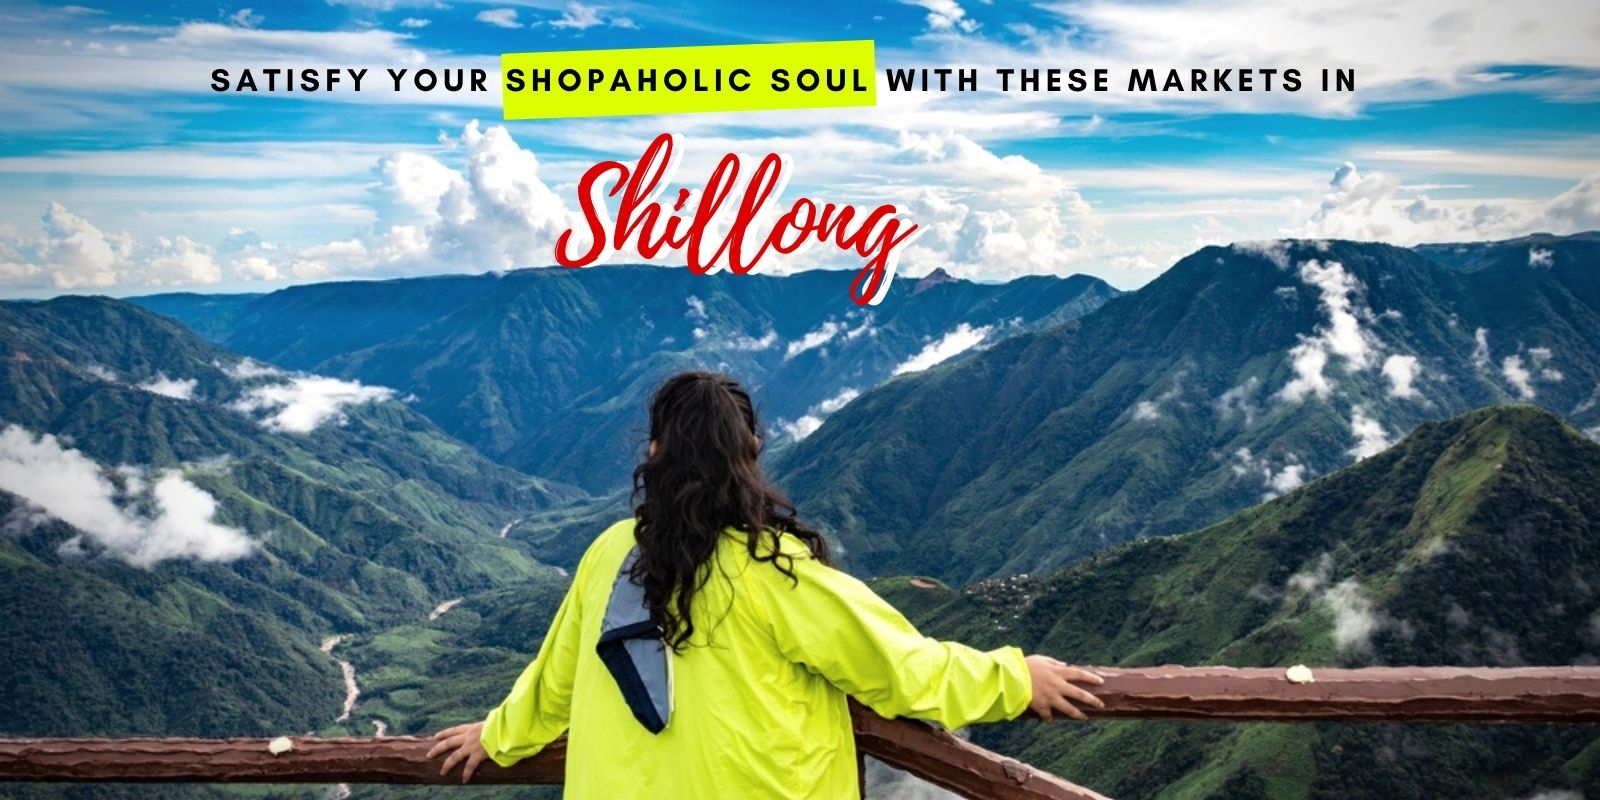 Satisfy Your Shopaholic Soul with These Markets in Shillong